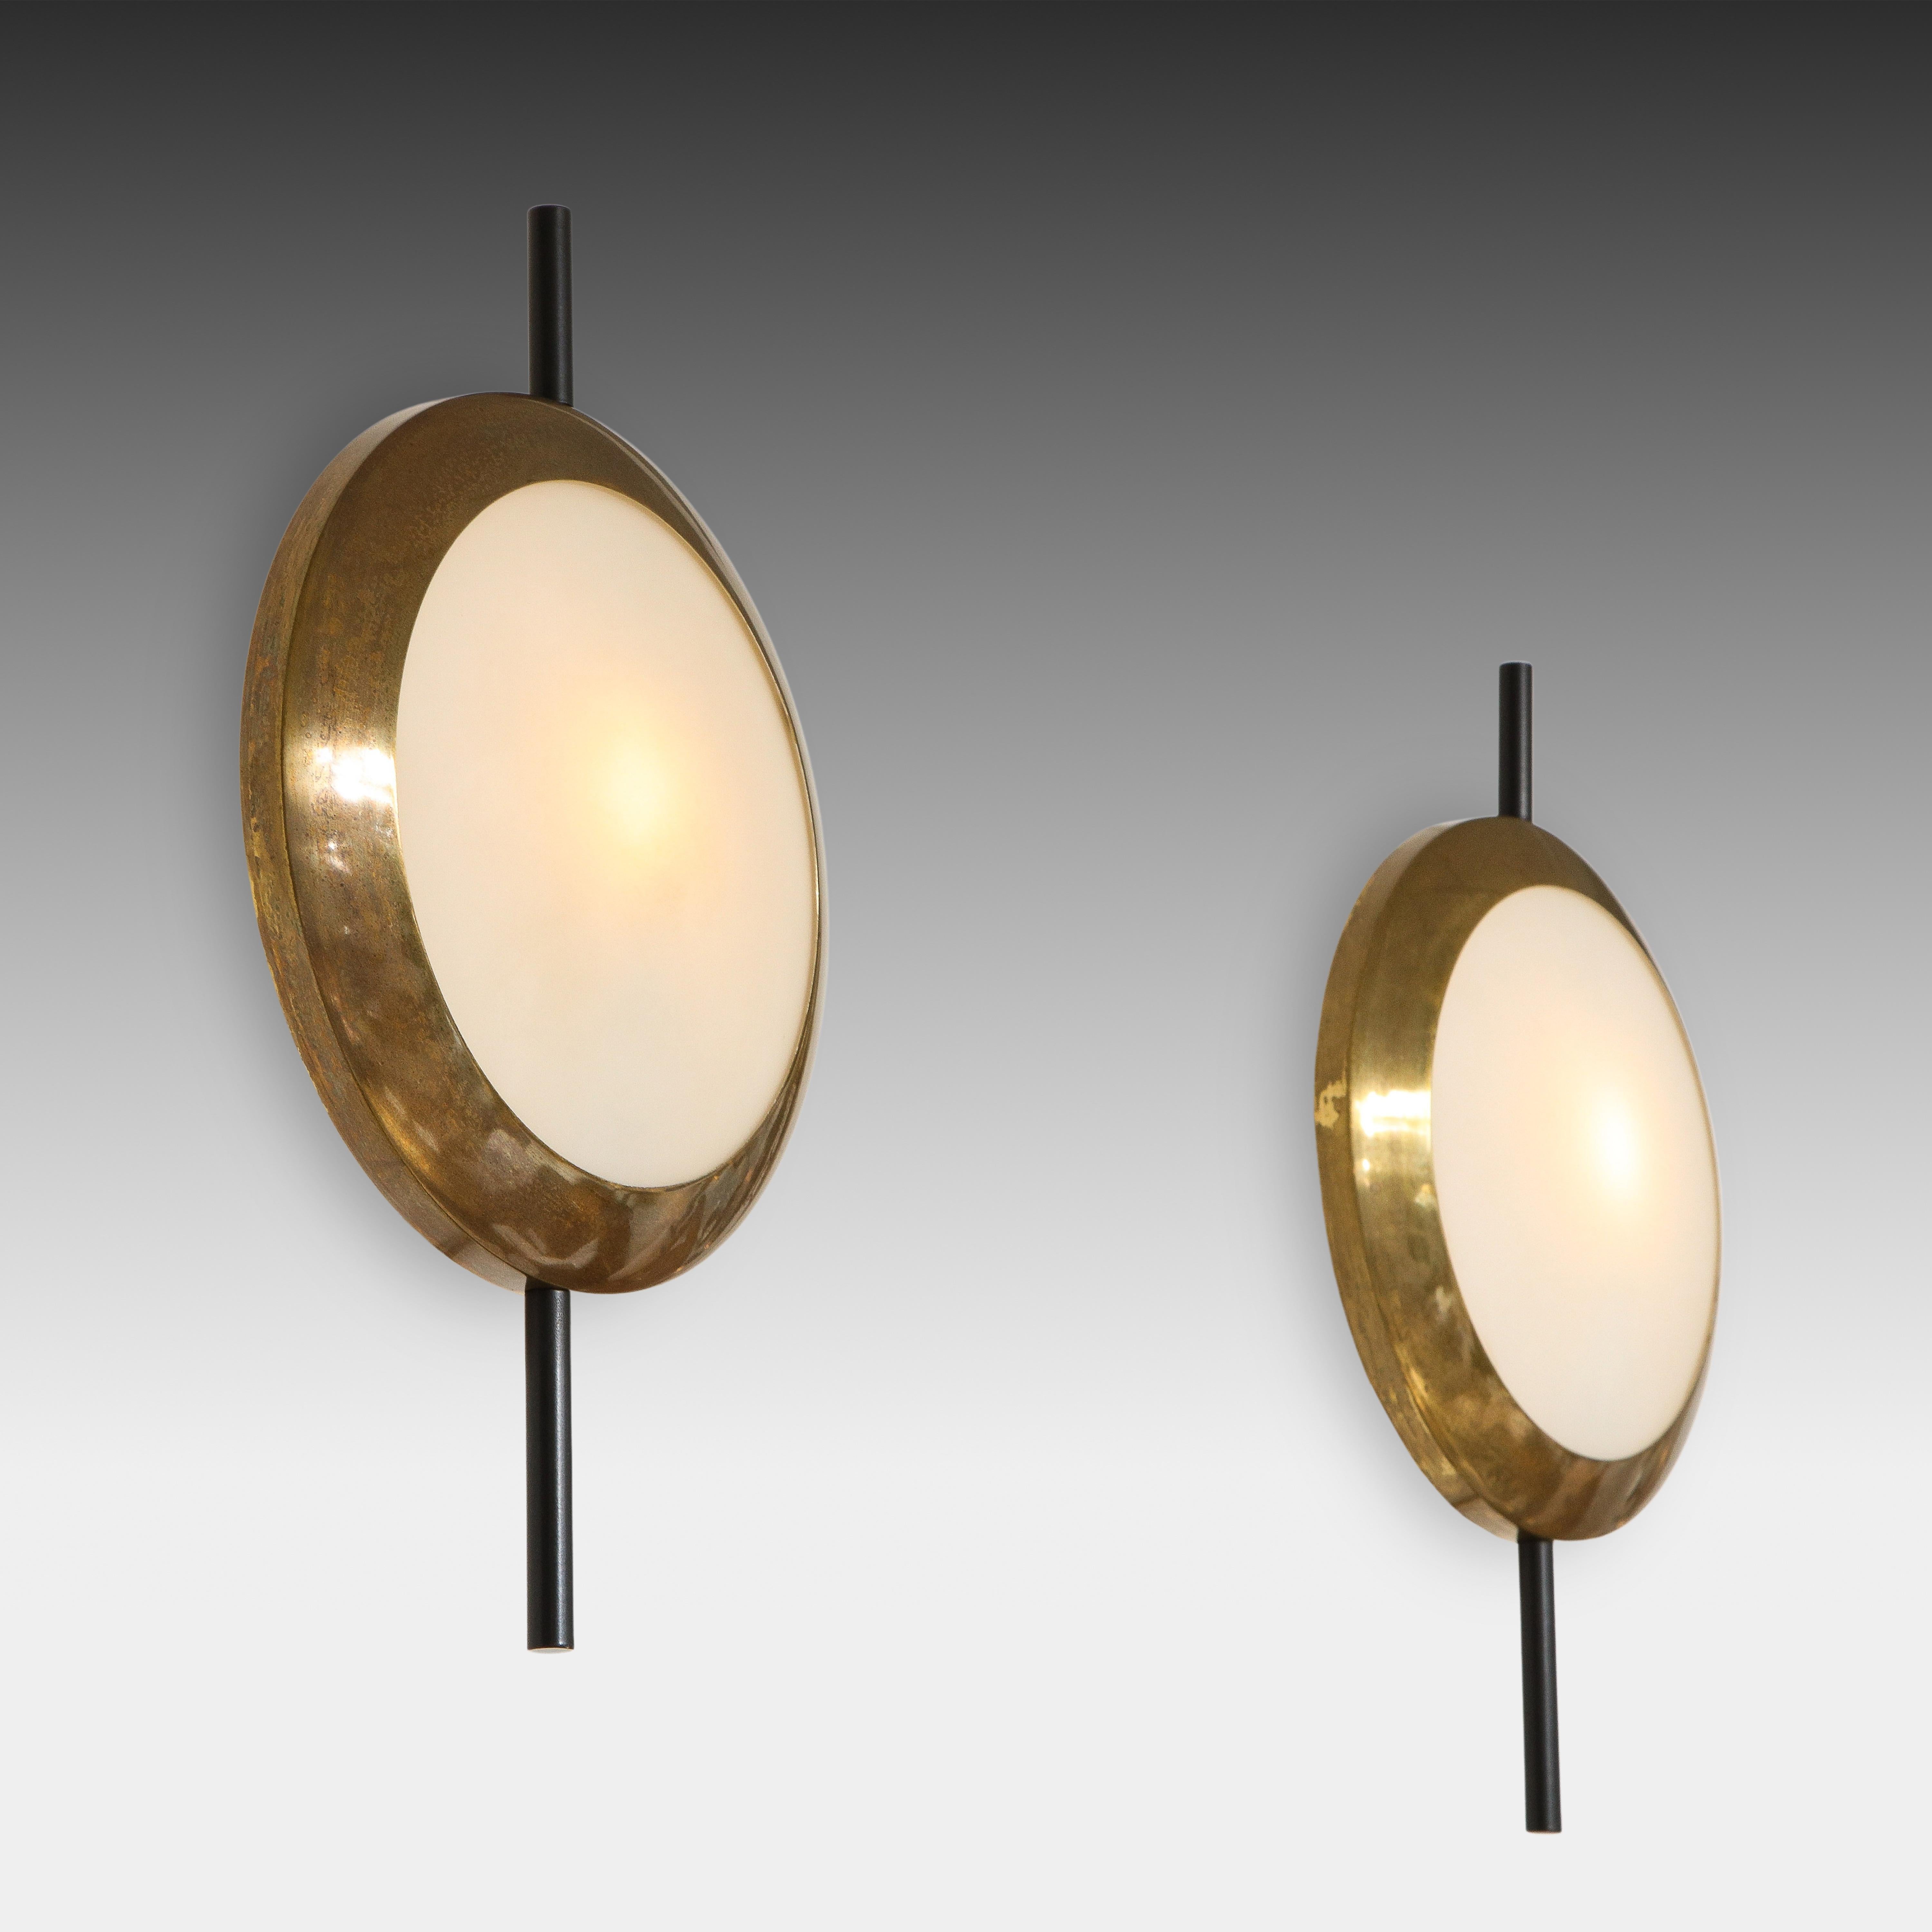 Italian Stilnovo Rare Pairs of Sconces in Brass and Opaline Glass, Italy, 1950s